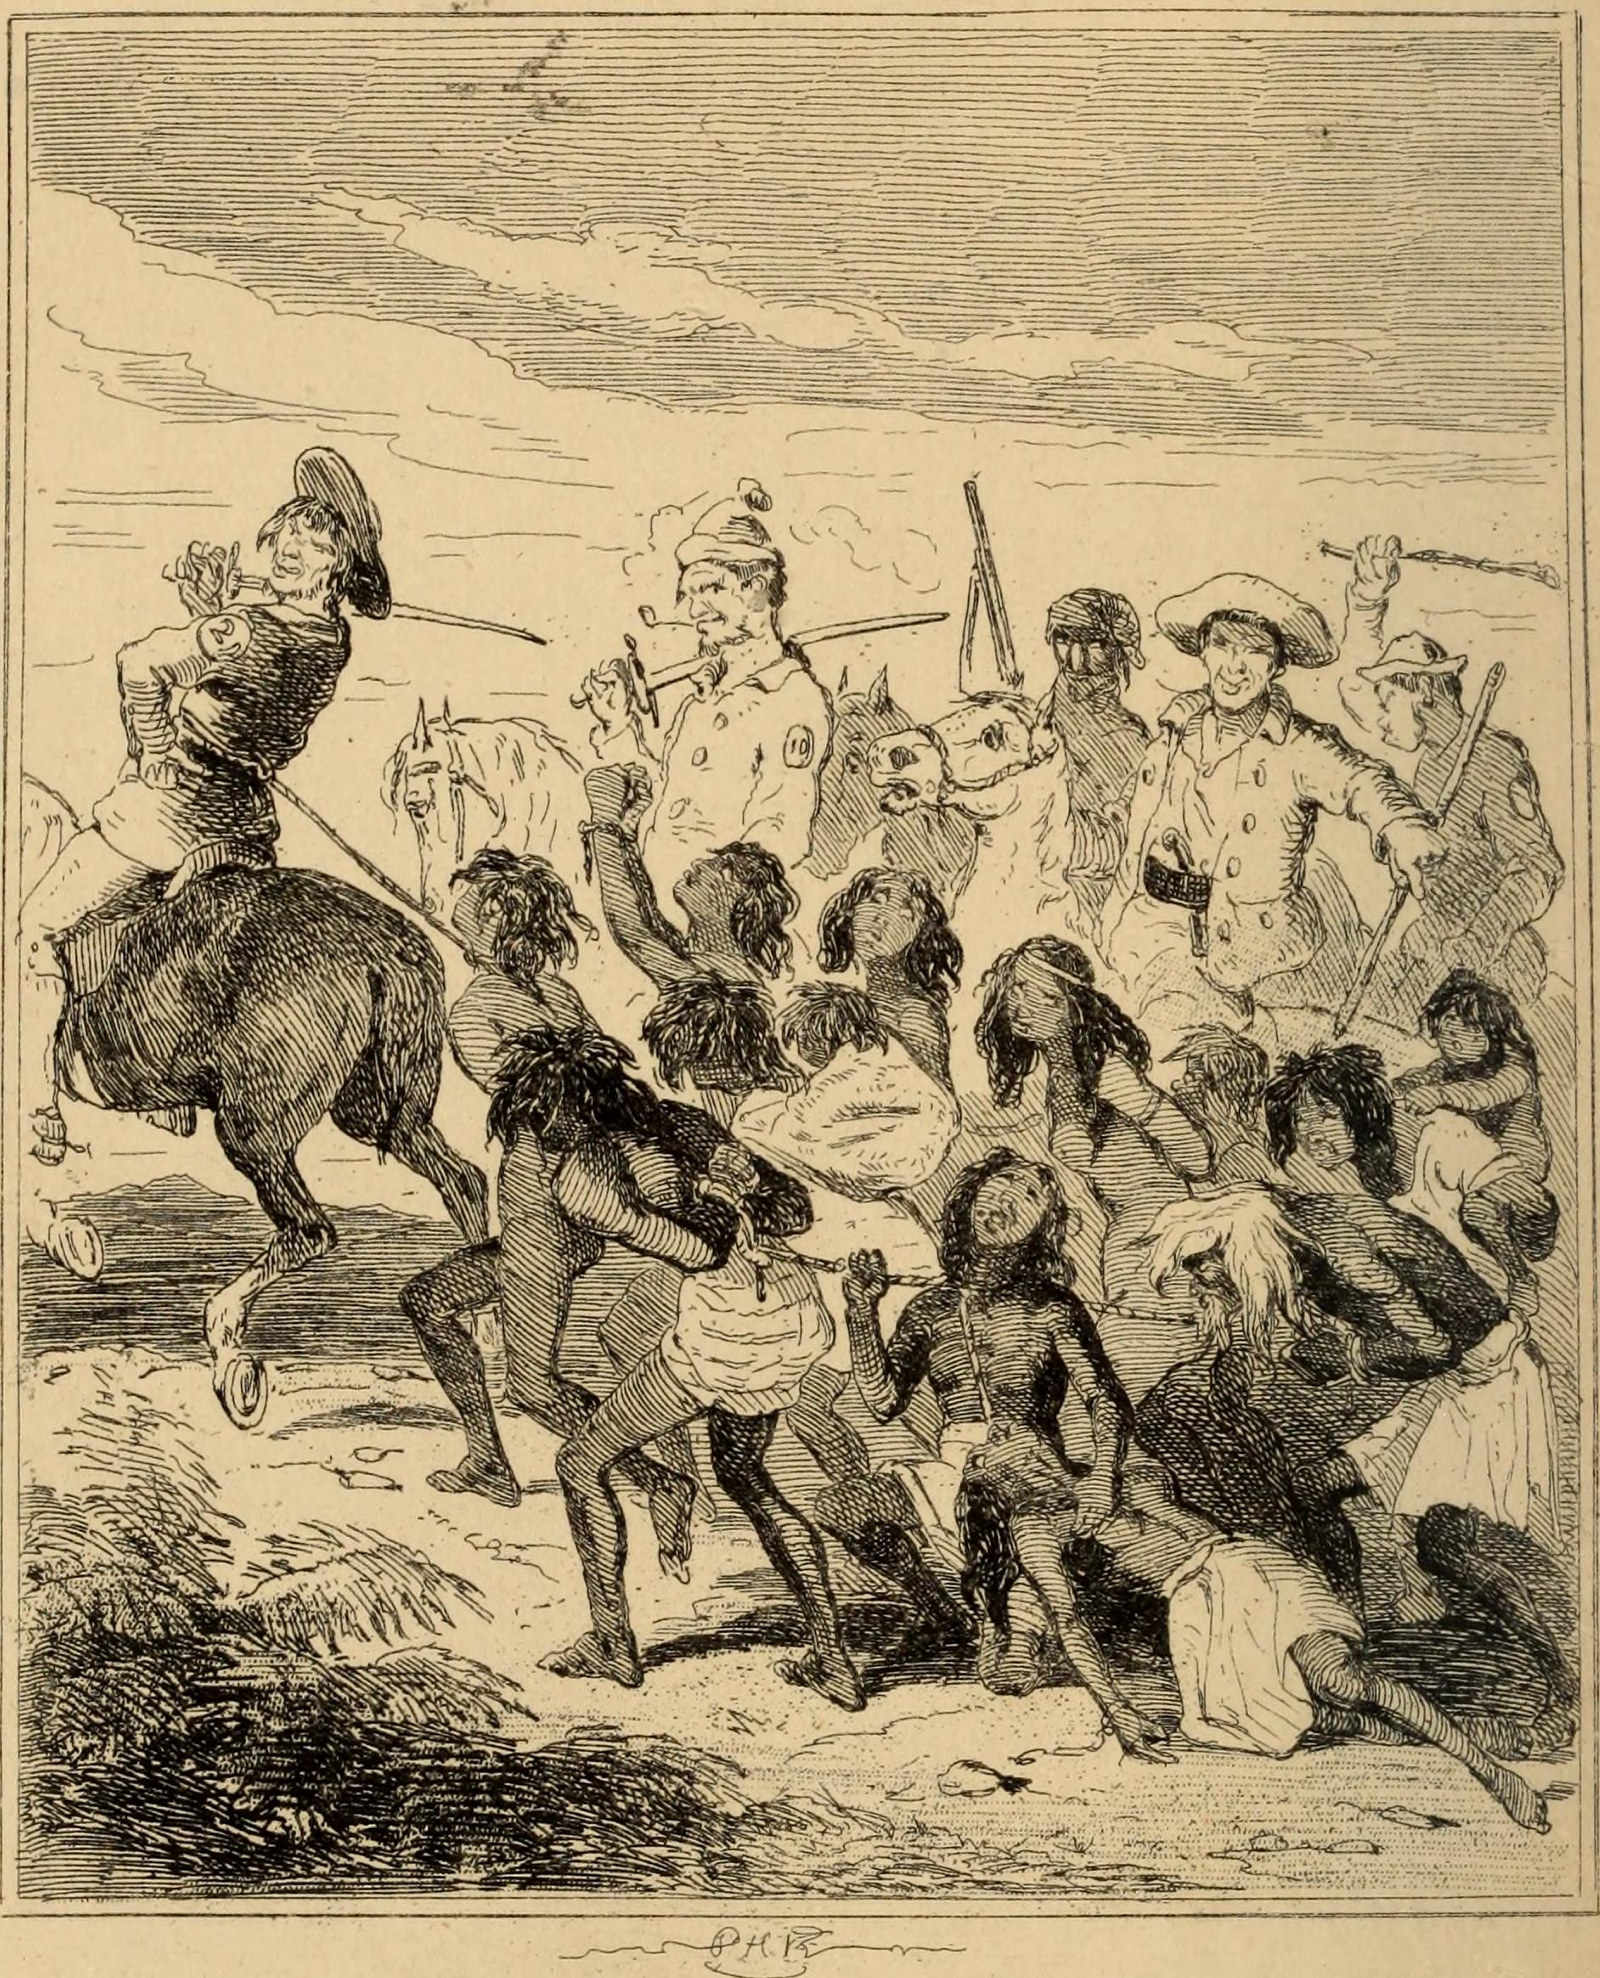 'Australian Aborigines Slaughtered by Convicts' [Illustration of the Myall Creek Massacre, 1838]